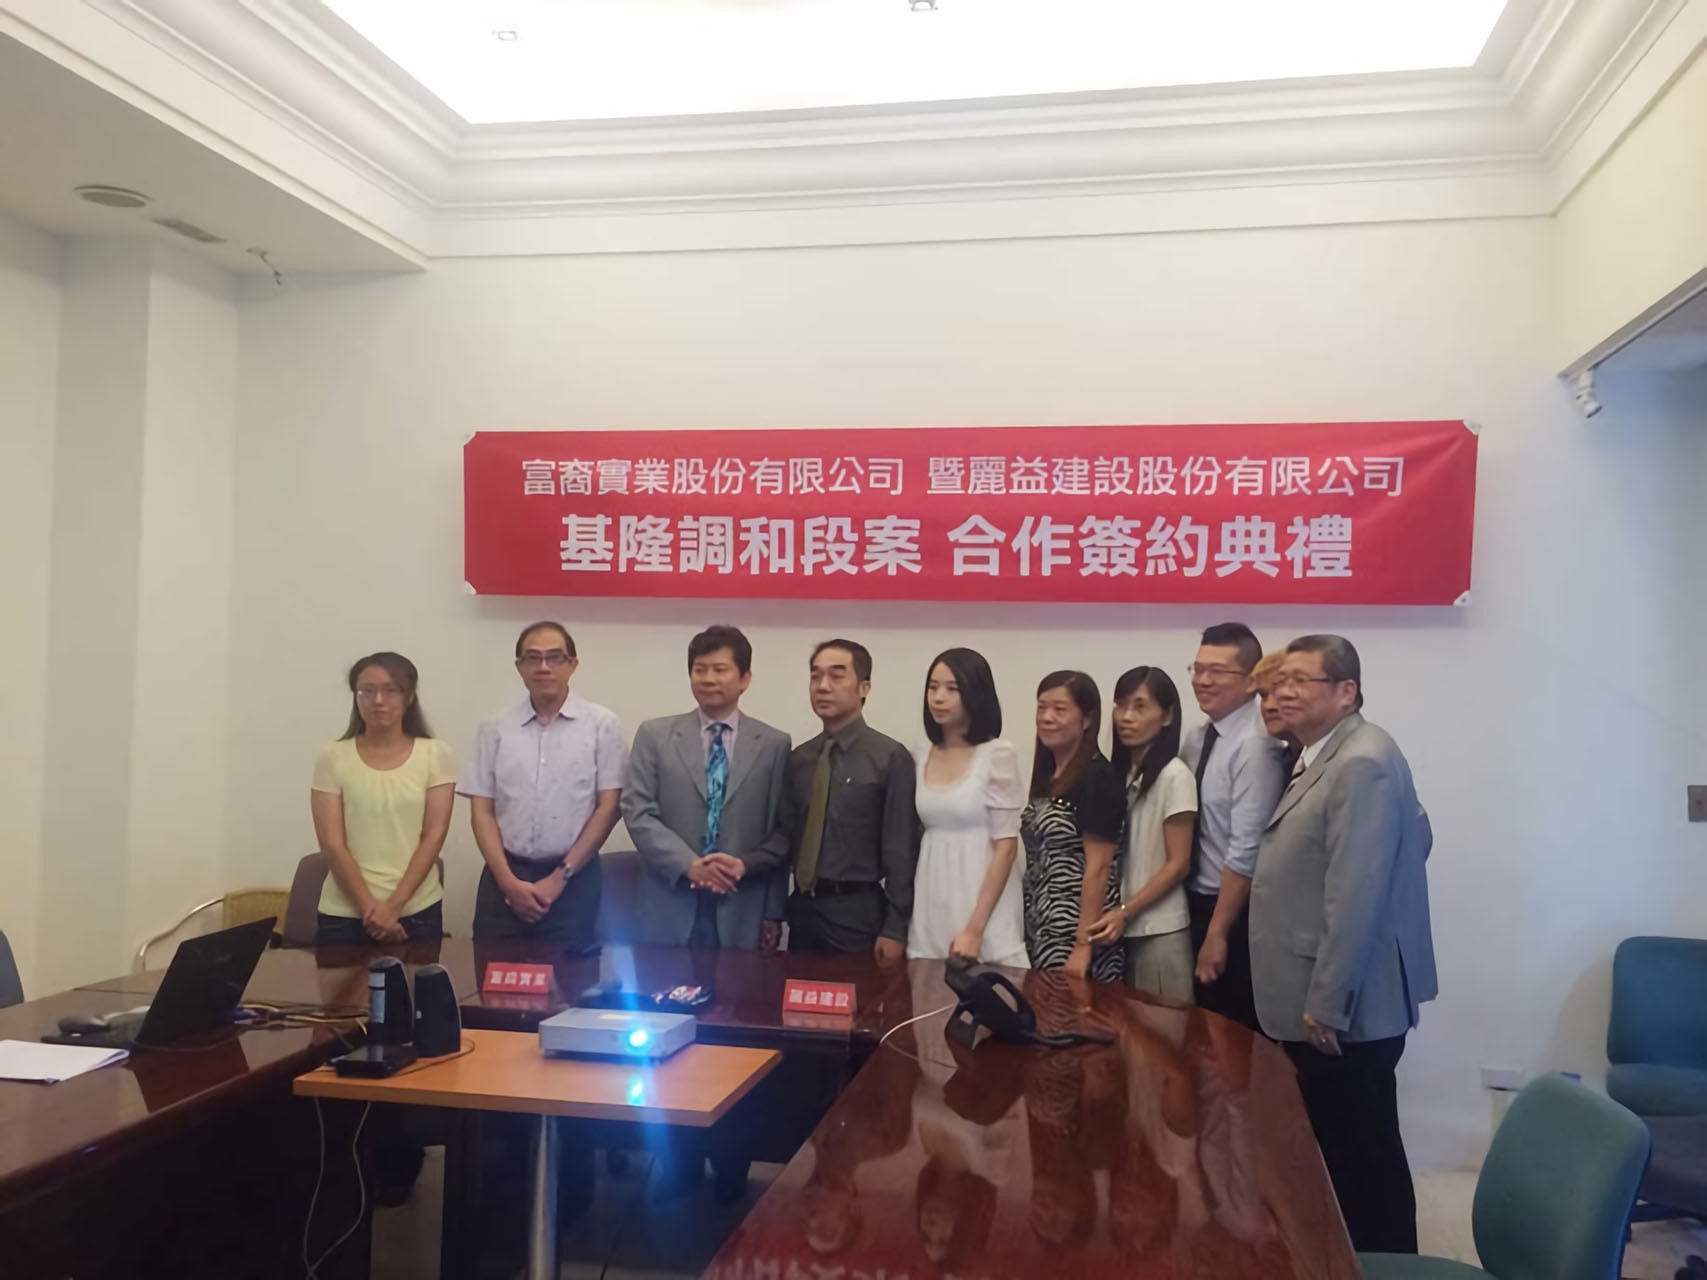 Keelung Diaohe project cooperation signing was reached.